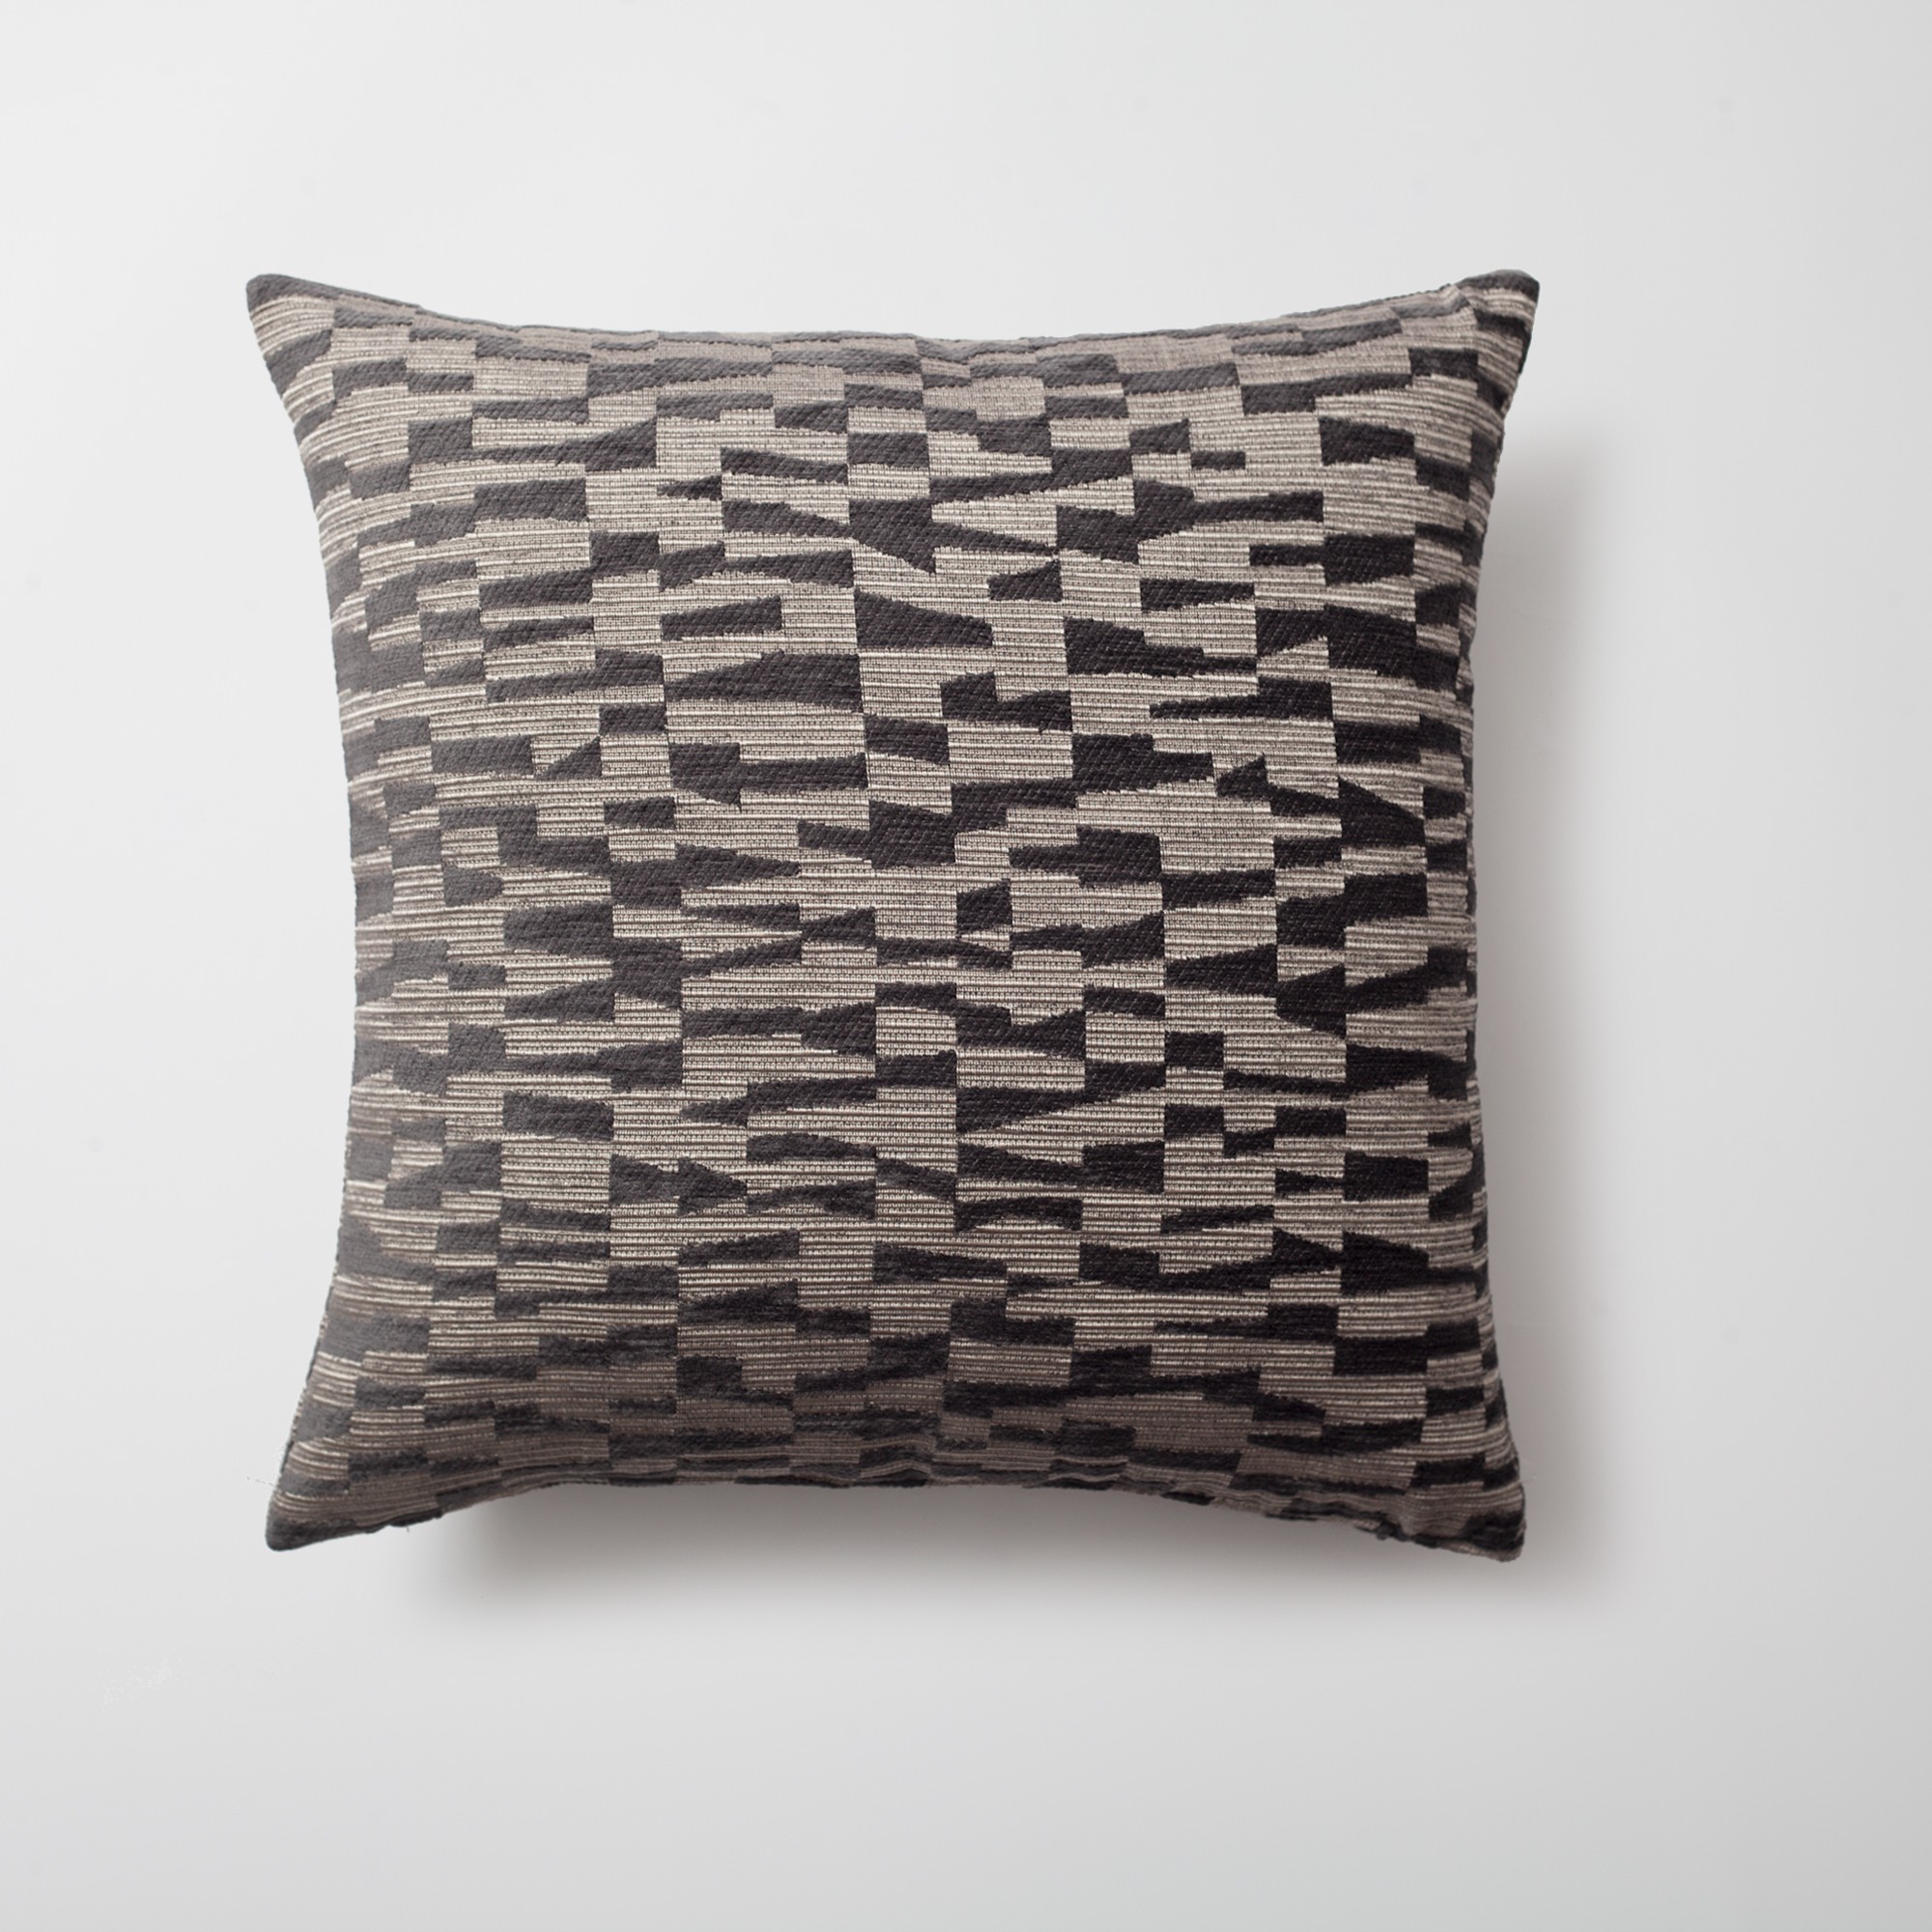 "Bistro" - Geometric Patterned 18x18 Inch Cushion - Anthracite (Cover Only)